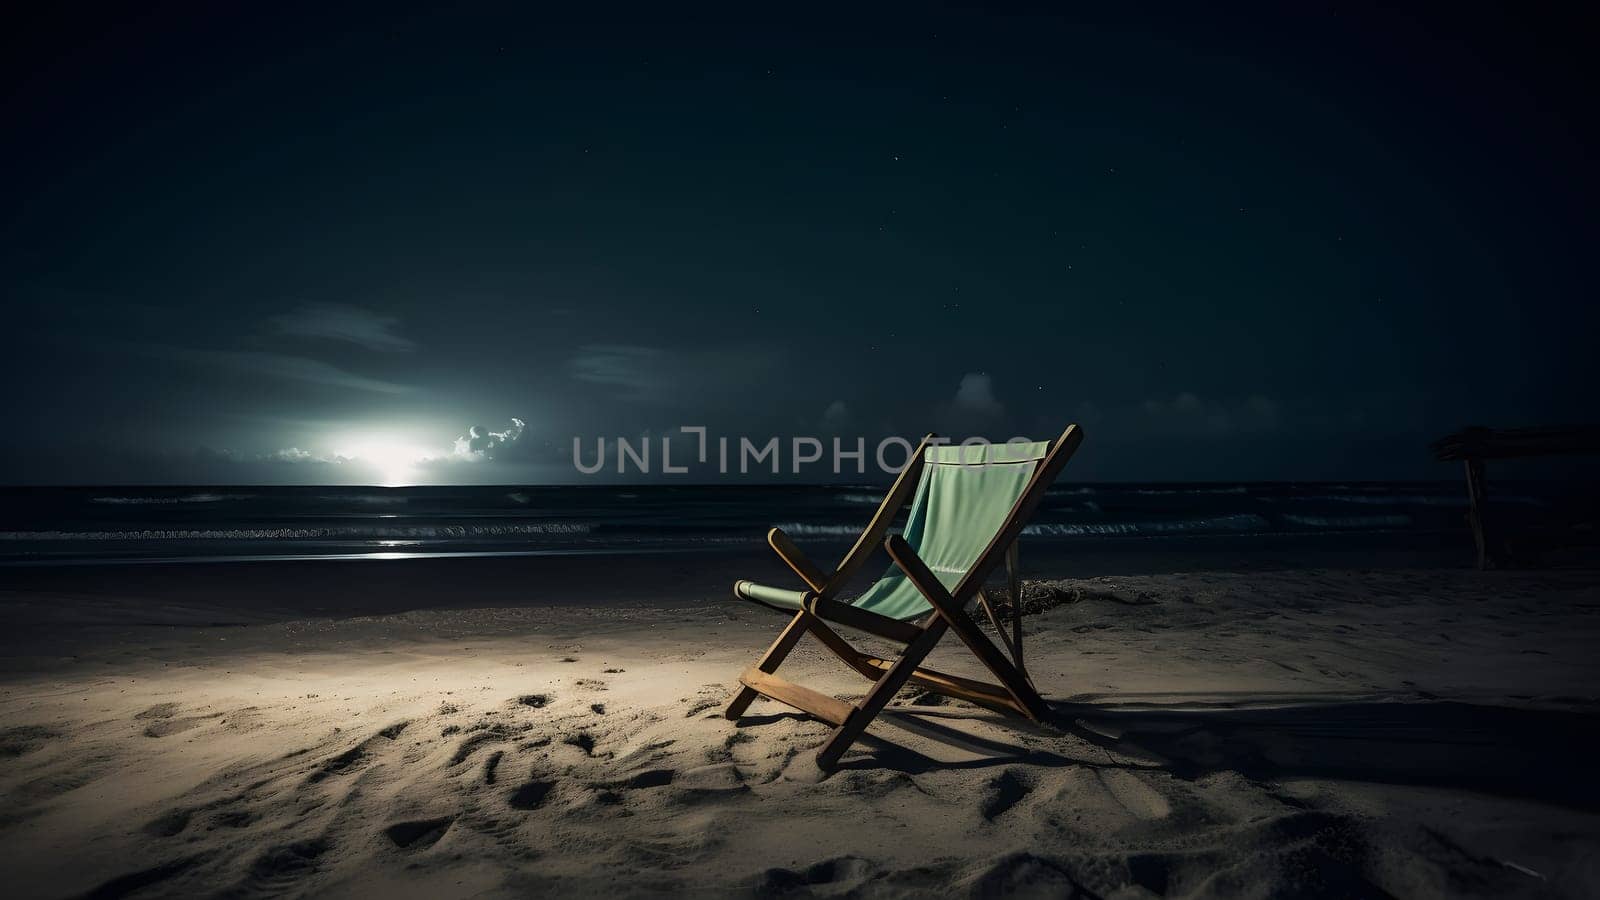 Empty beach chair on sand beach at night - summer vacation theme, neural network generated art by z1b